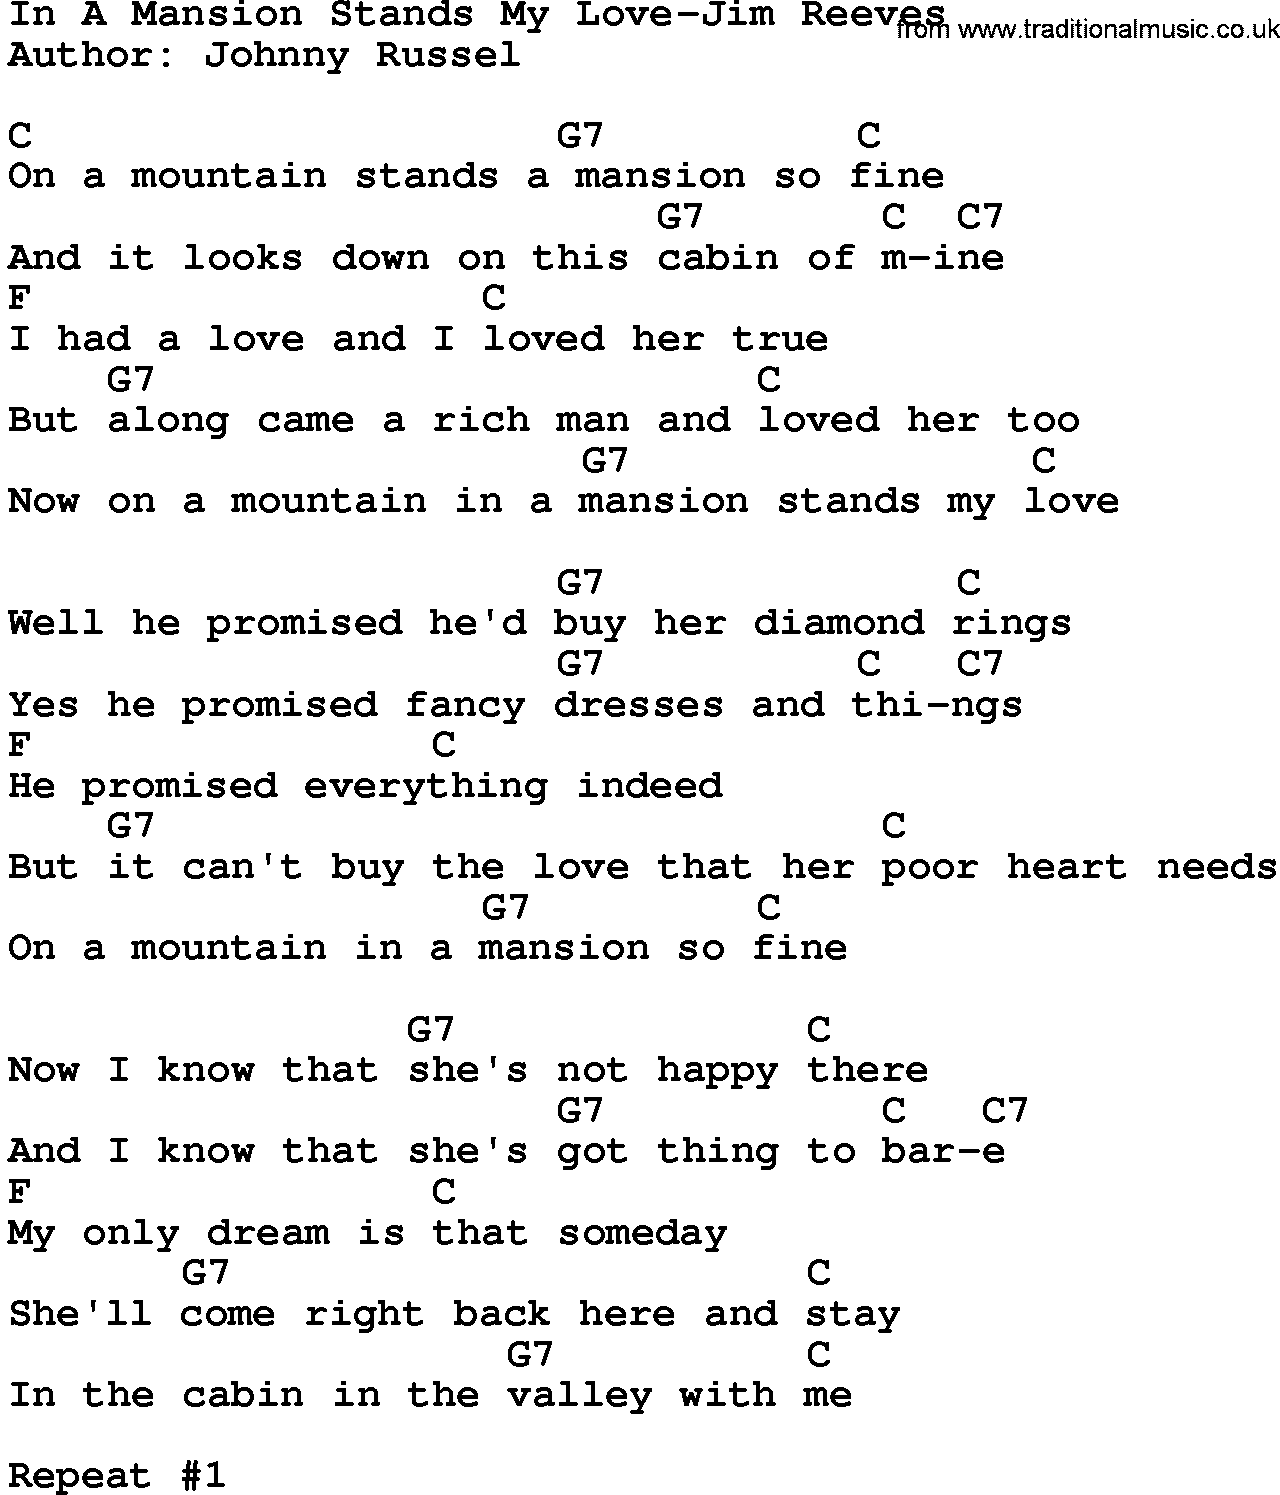 Country music song: In A Mansion Stands My Love-Jim Reeves lyrics and chords